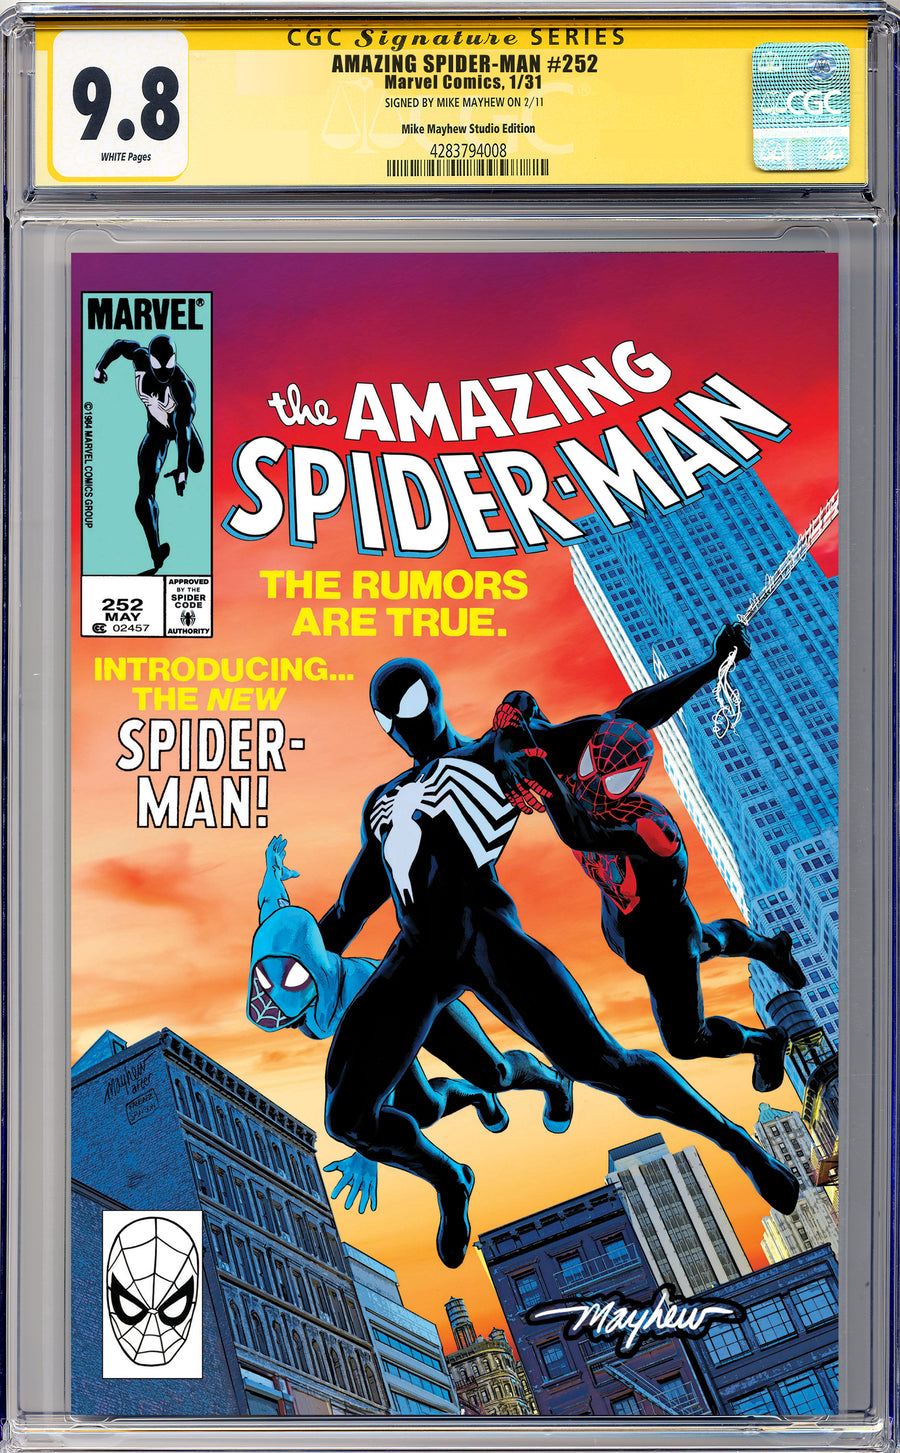 AMAZING SPIDER-MAN #252 FACSIMILE EDITION Mike Mayhew Studio Variant Cover A Trade Dress Glow Sig CGC Yellow Label 9.6 and Above Graded Slab